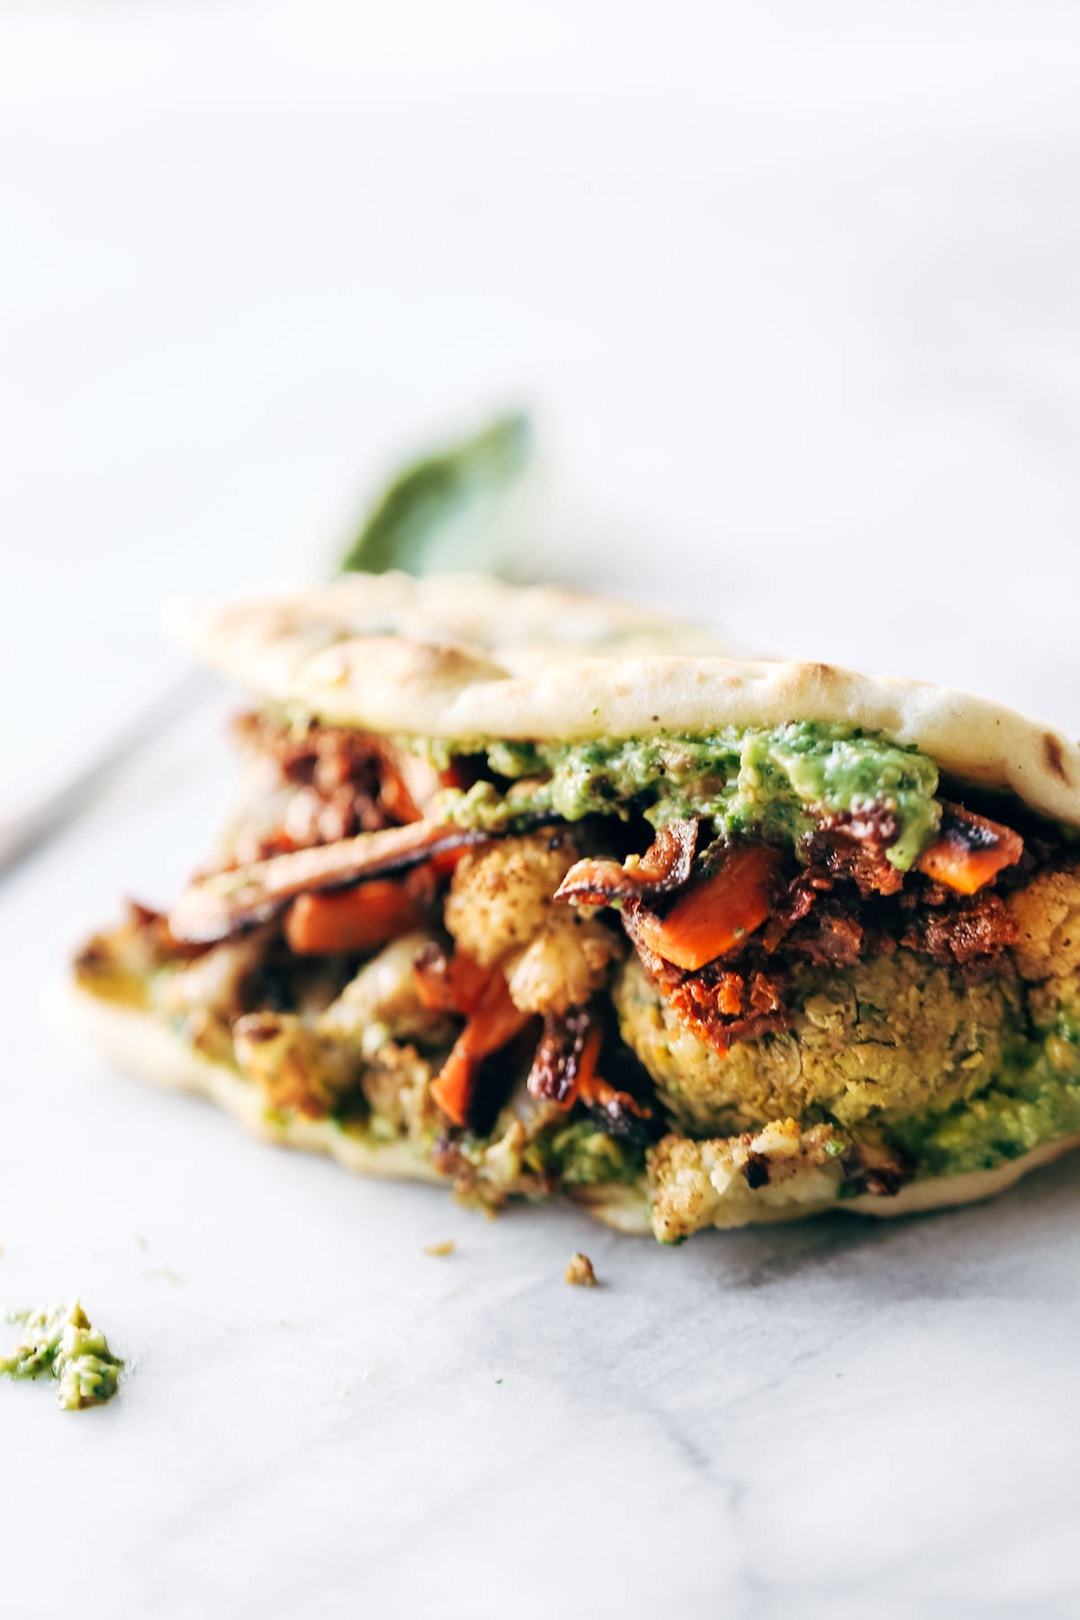 11 Yummy Plant Based Sandwiches - Falafel Naanwhich by Pinch of Yum